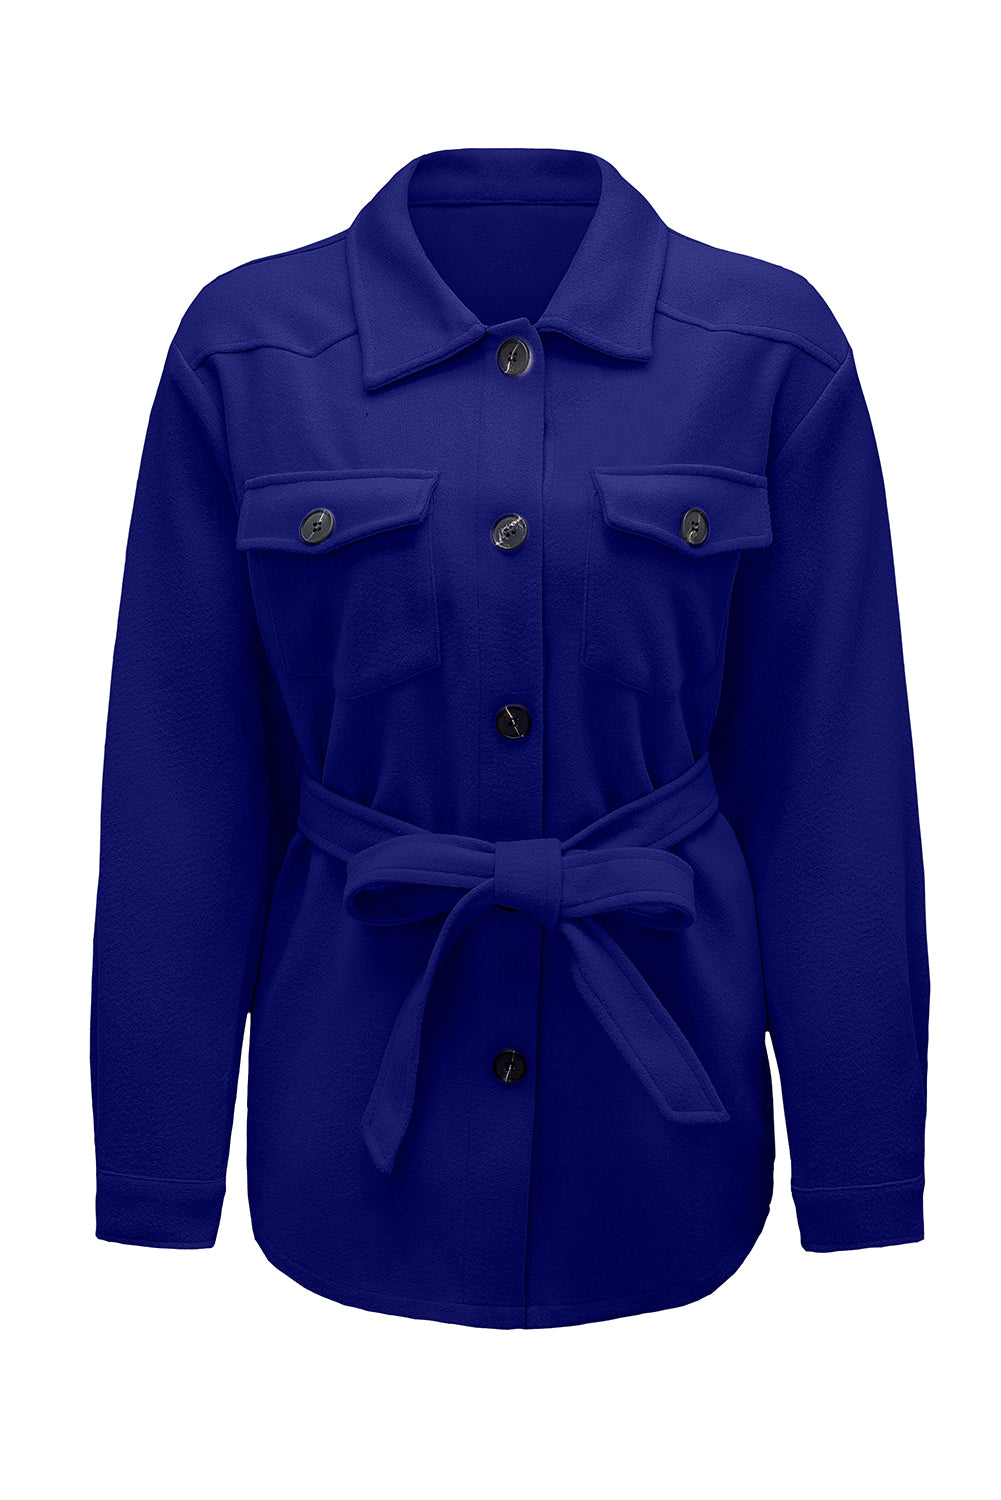 Blue Women's Lapel Button Down Coat Winter Belted Coat with Pockets LC8511359-105